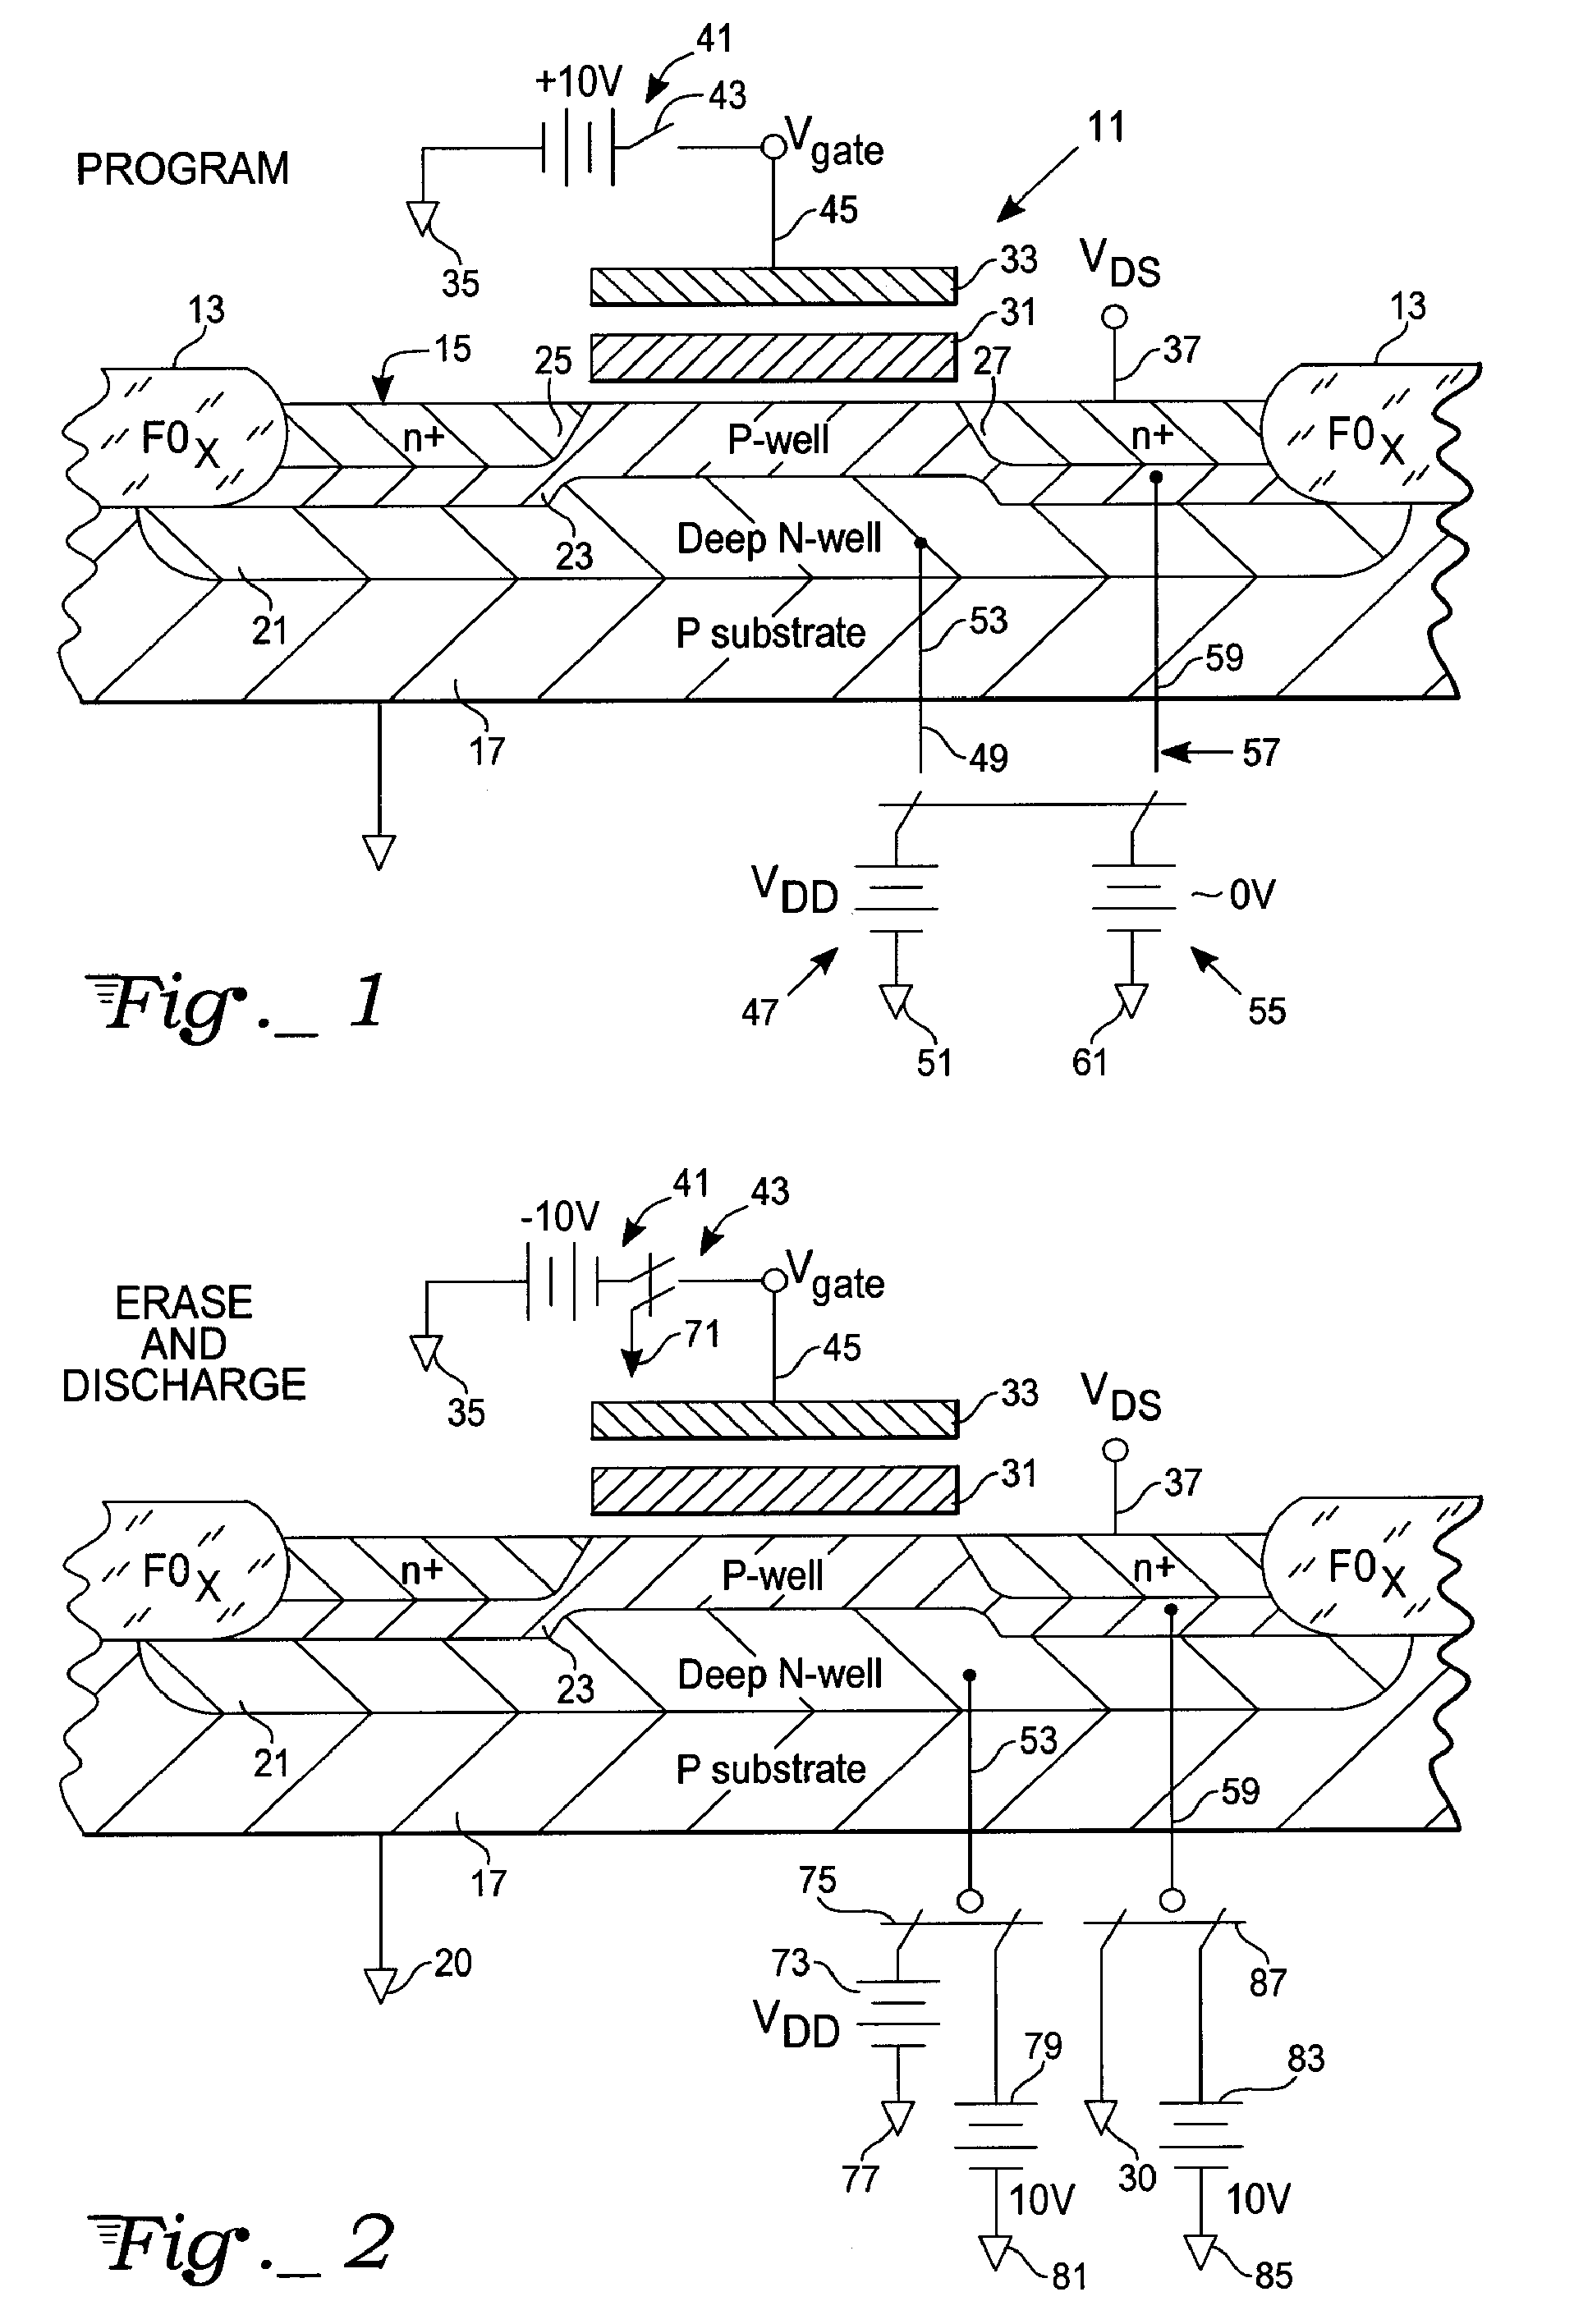 Channel discharging after erasing flash memory devices